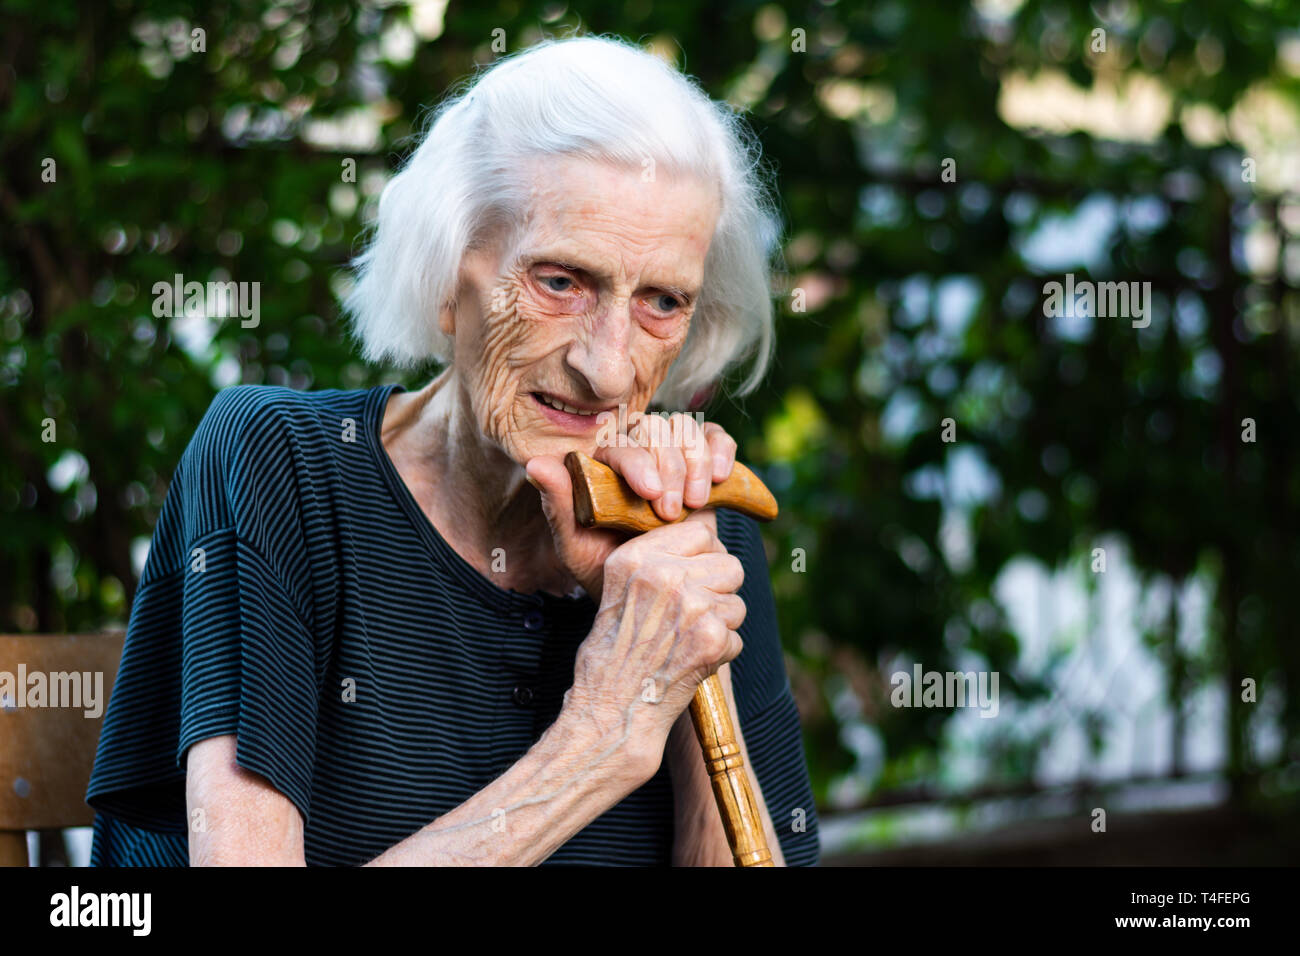 Portrait of a senior woman with a walking cane outdoors Stock Photo